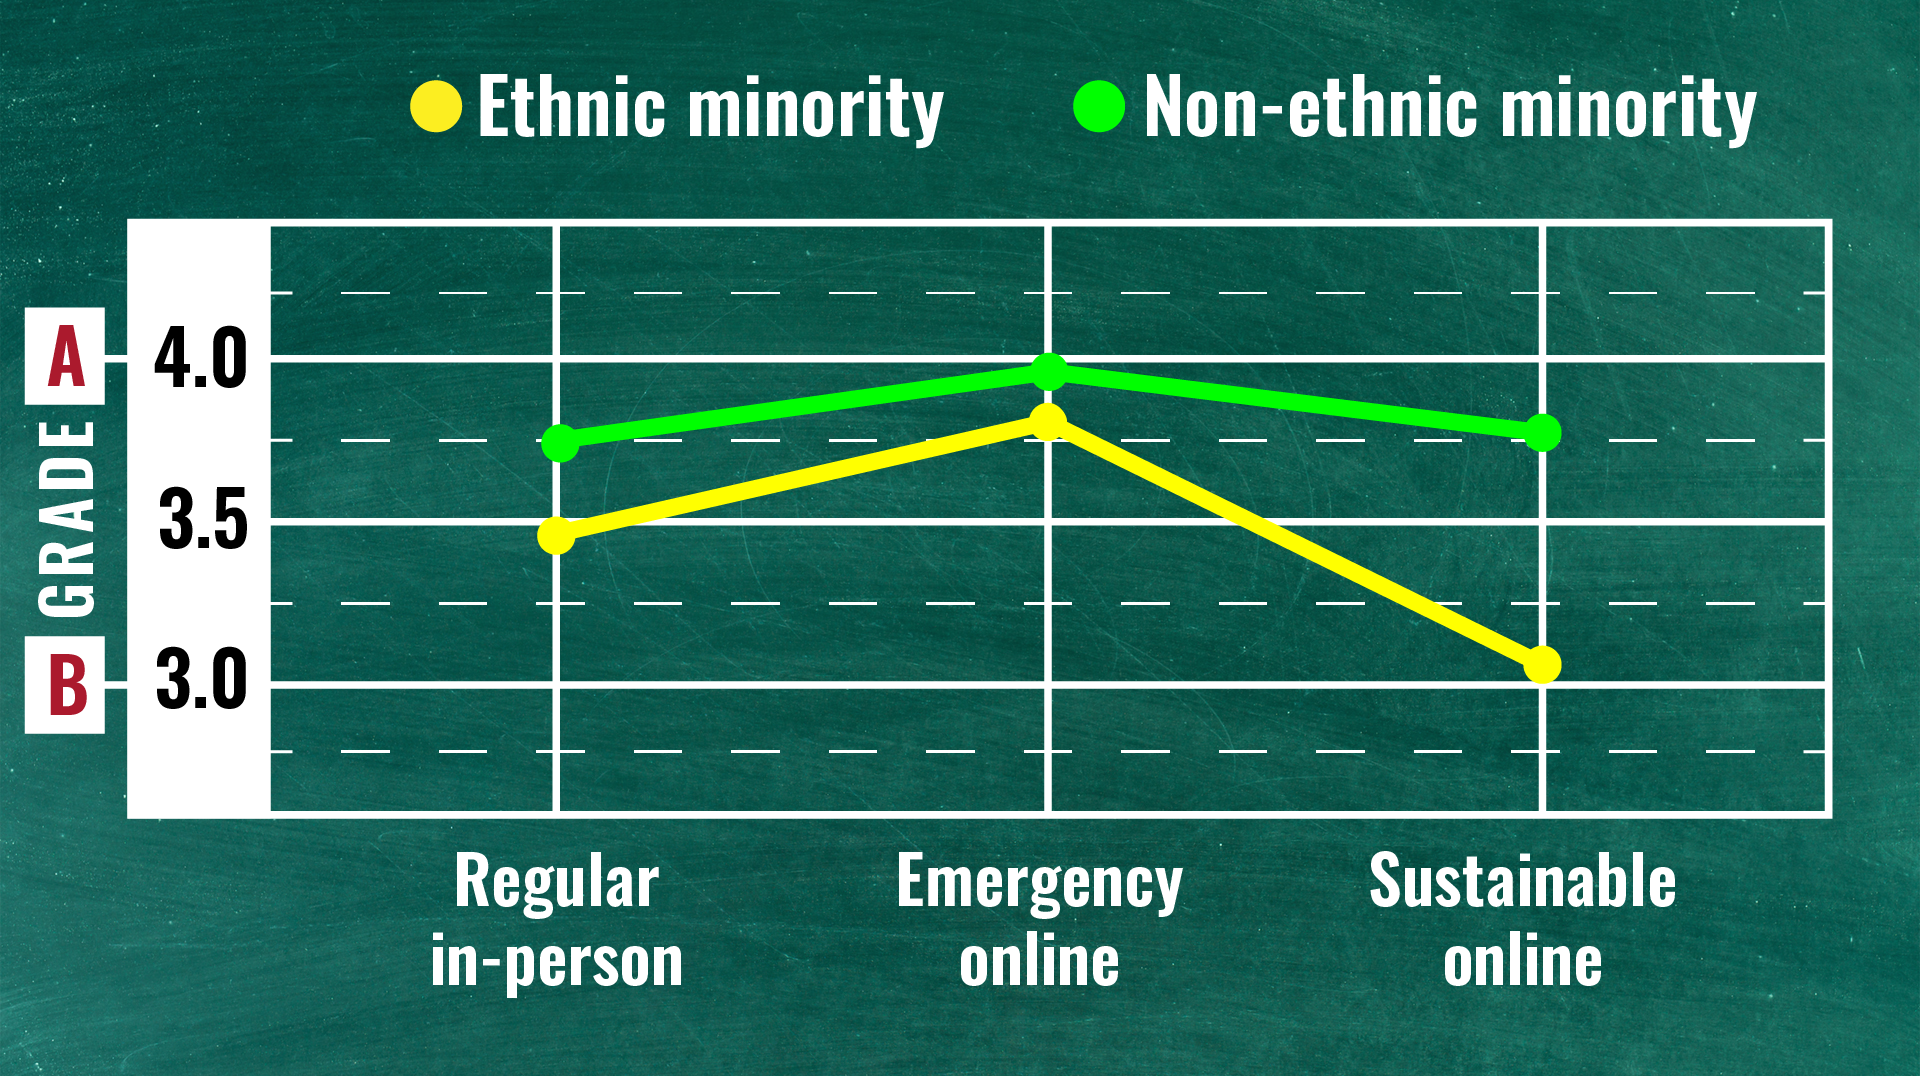 A chart showing how students of different ethnicities were affected by online learning